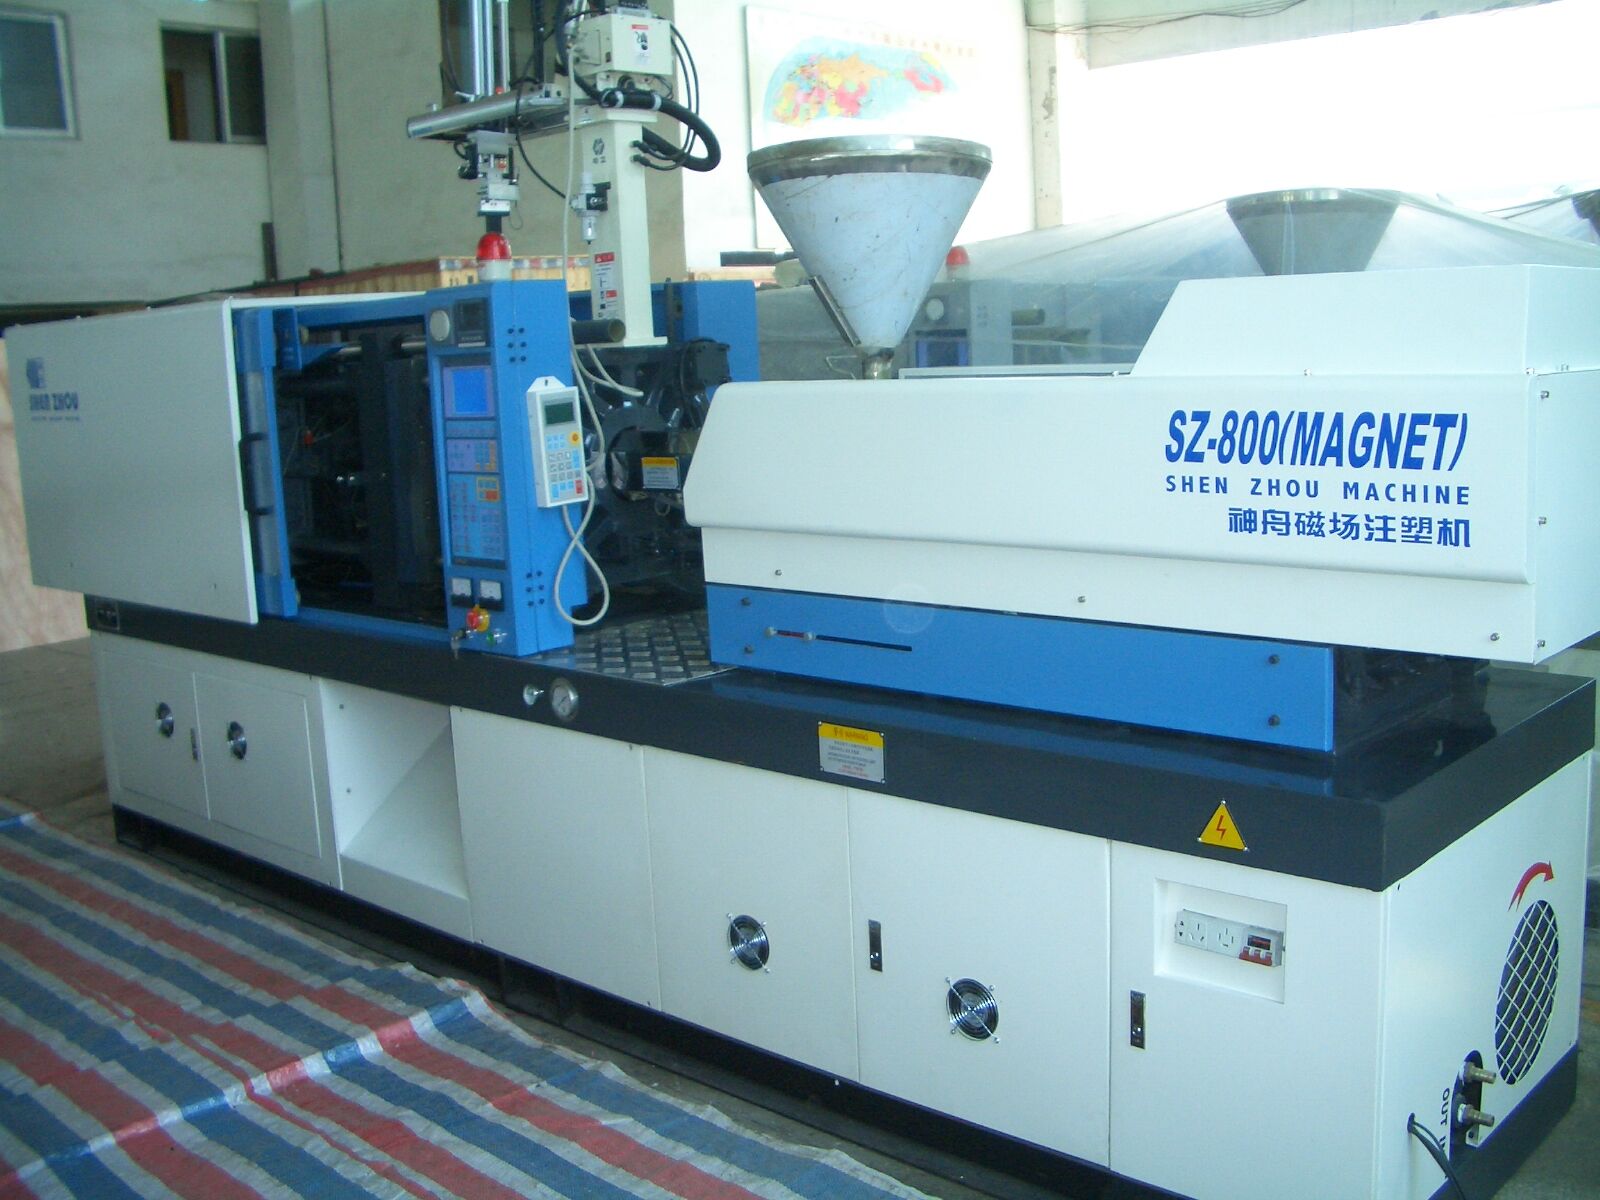 Magnetic Field Injection Molding Machine